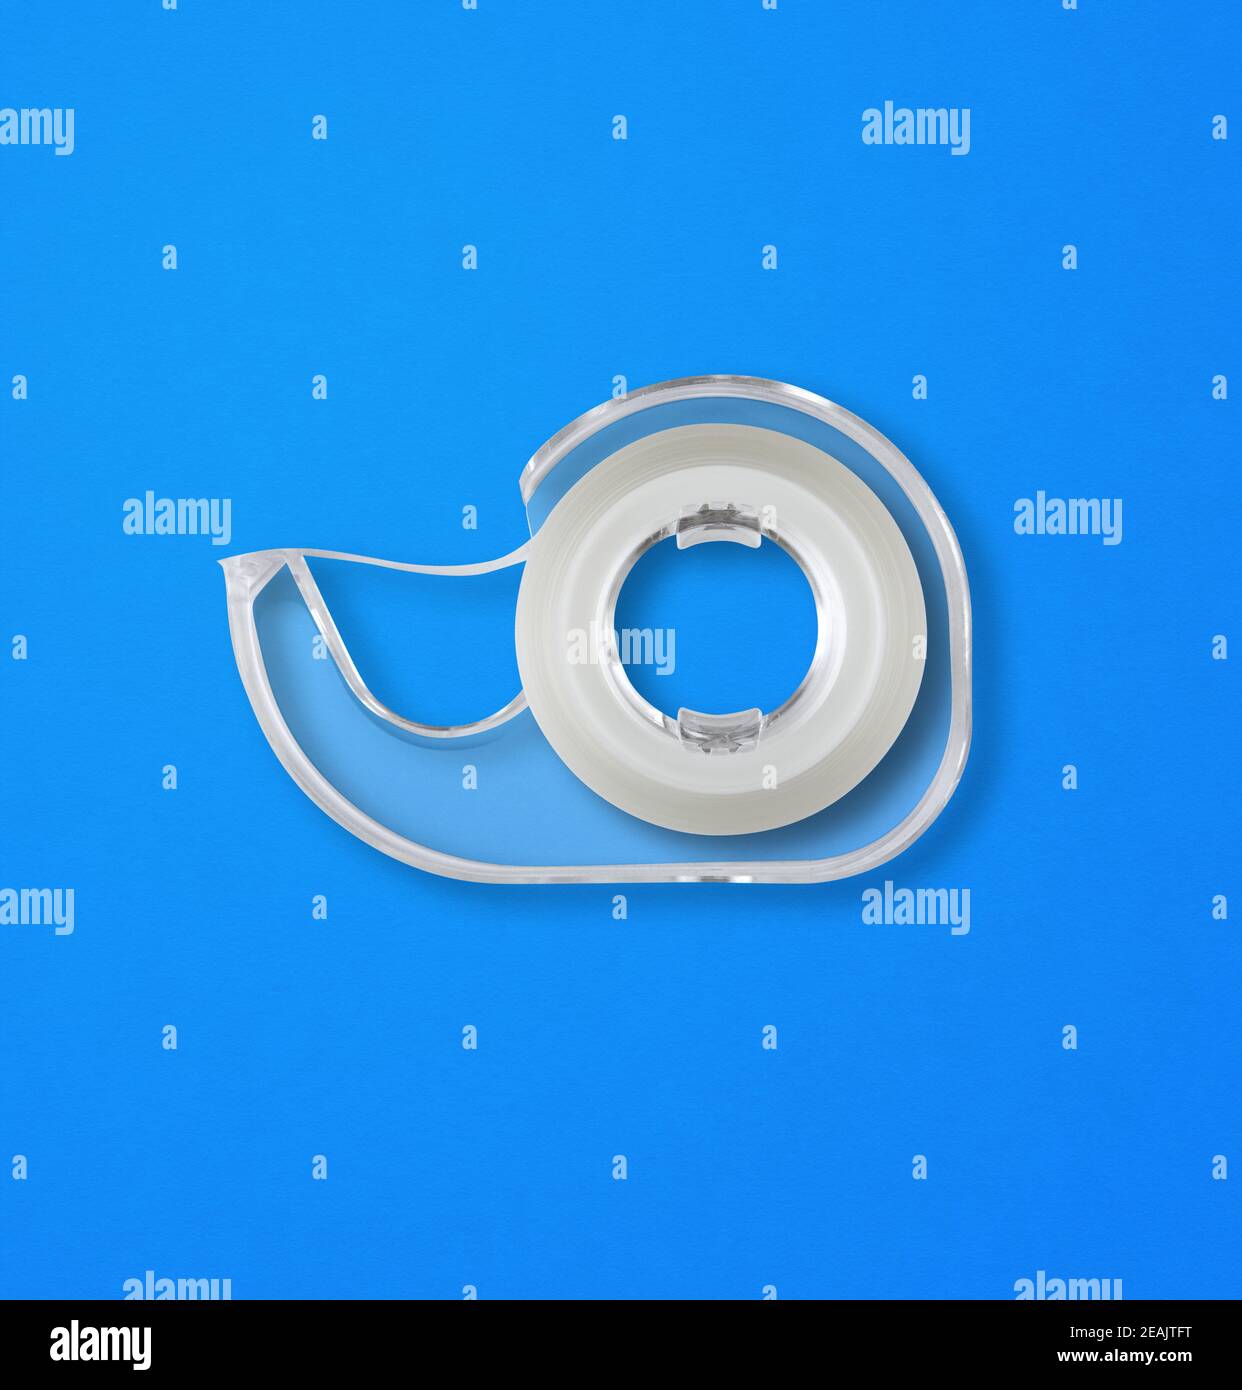 Scotch tape dispenser isolated on blue background Stock Photo